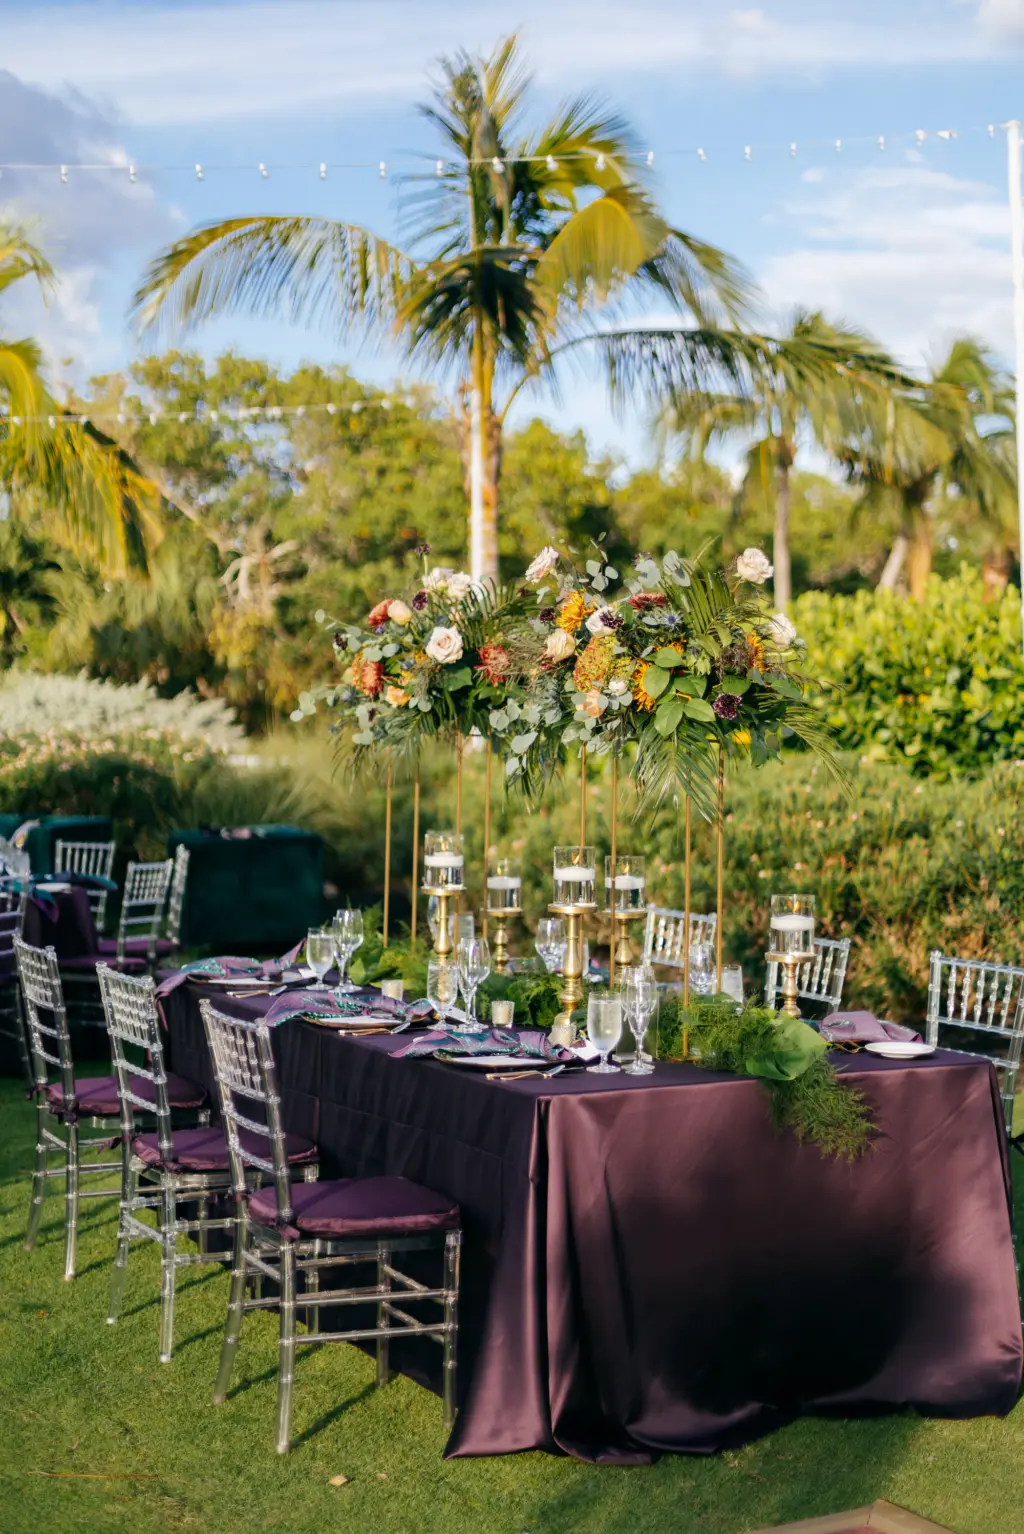 Jewel-Toned Moody Fall Wedding Reception Table Decor Ideas | Ghost Chiavari Chairs with Eggplant Dark Purple Table Linen and Tall Centerpiece Inspiration | Sarasota Event Venue The Resort at Longboat Key Club